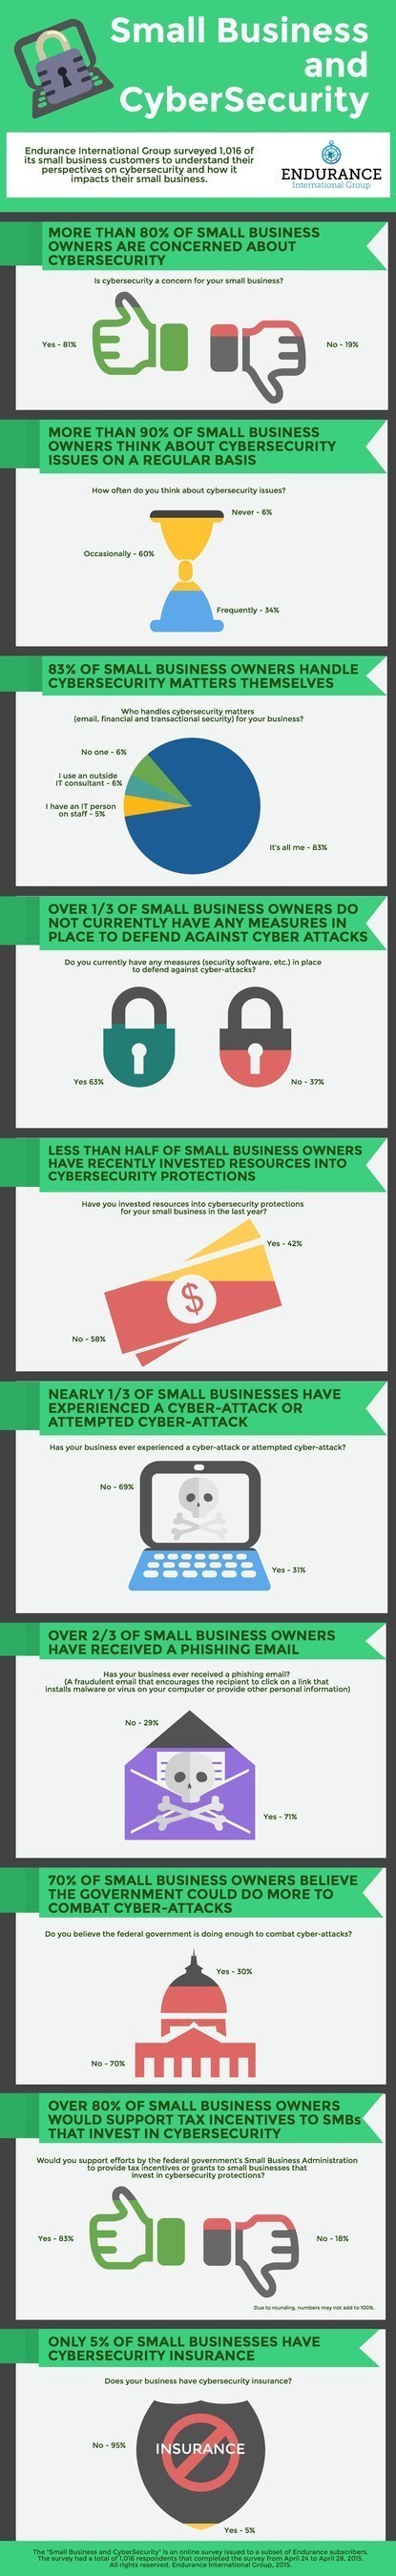 Small Business and Cybersecurity Infographic